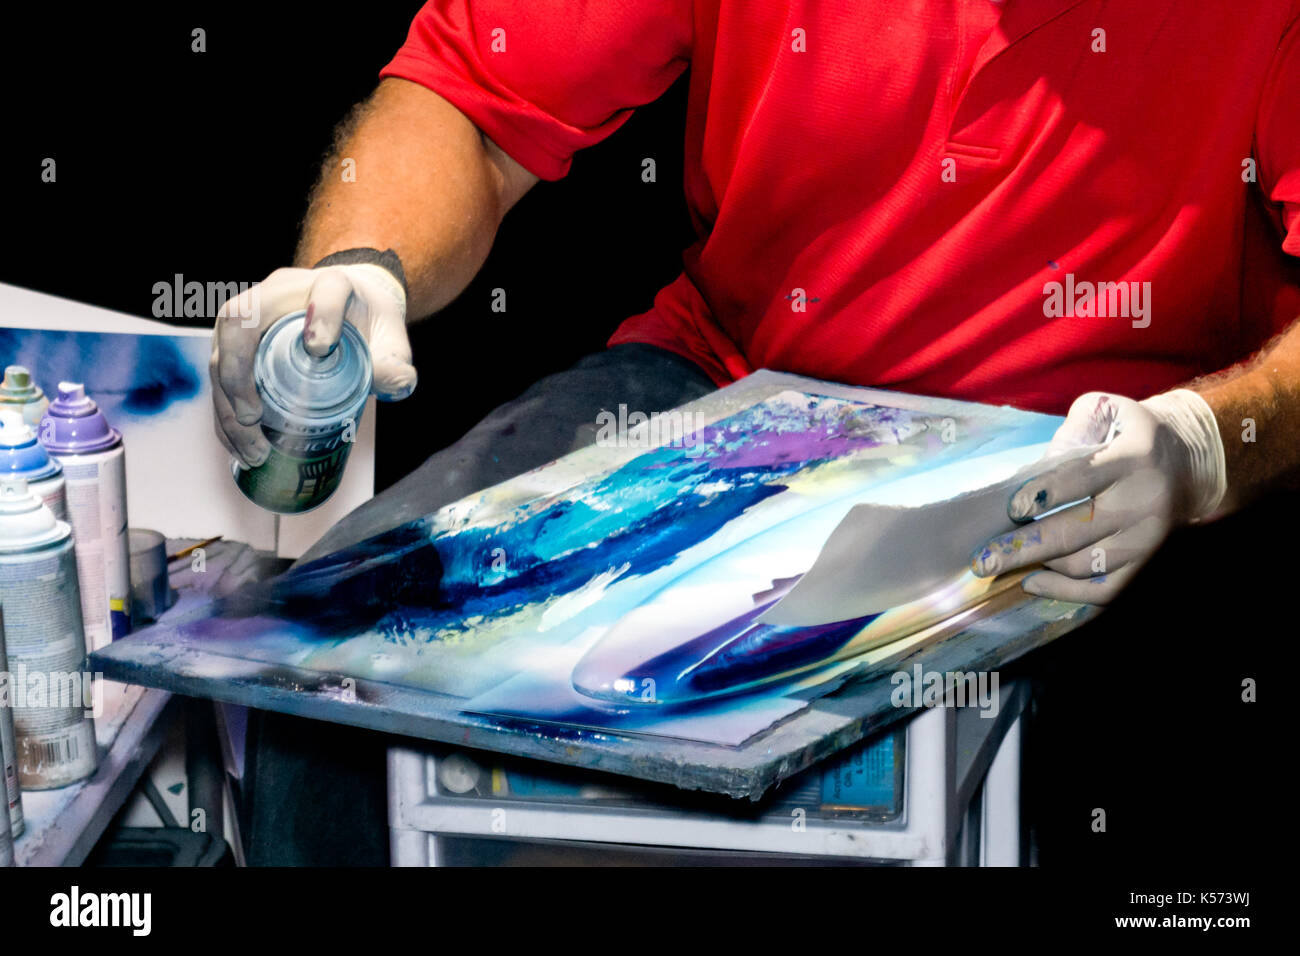 Street Artist spray painting souvenir surfboards. Painter's hands covered in latex gloves. Stock Photo